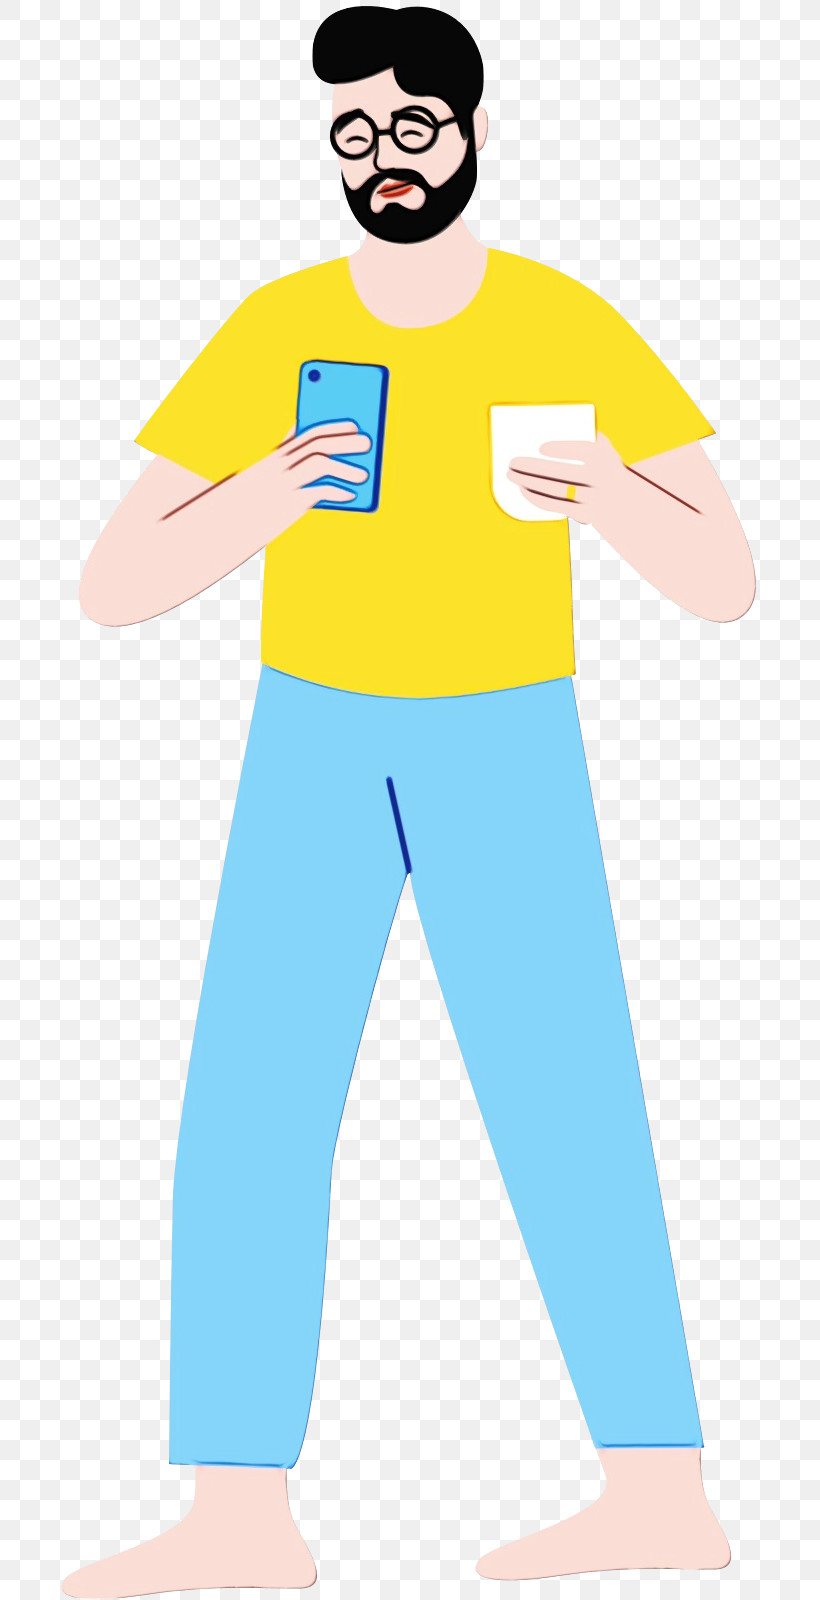 T-shirt Sleeve Cartoon Yellow Costume, PNG, 714x1600px, Standing, Cartoon, Costume, Paint, Posture Download Free